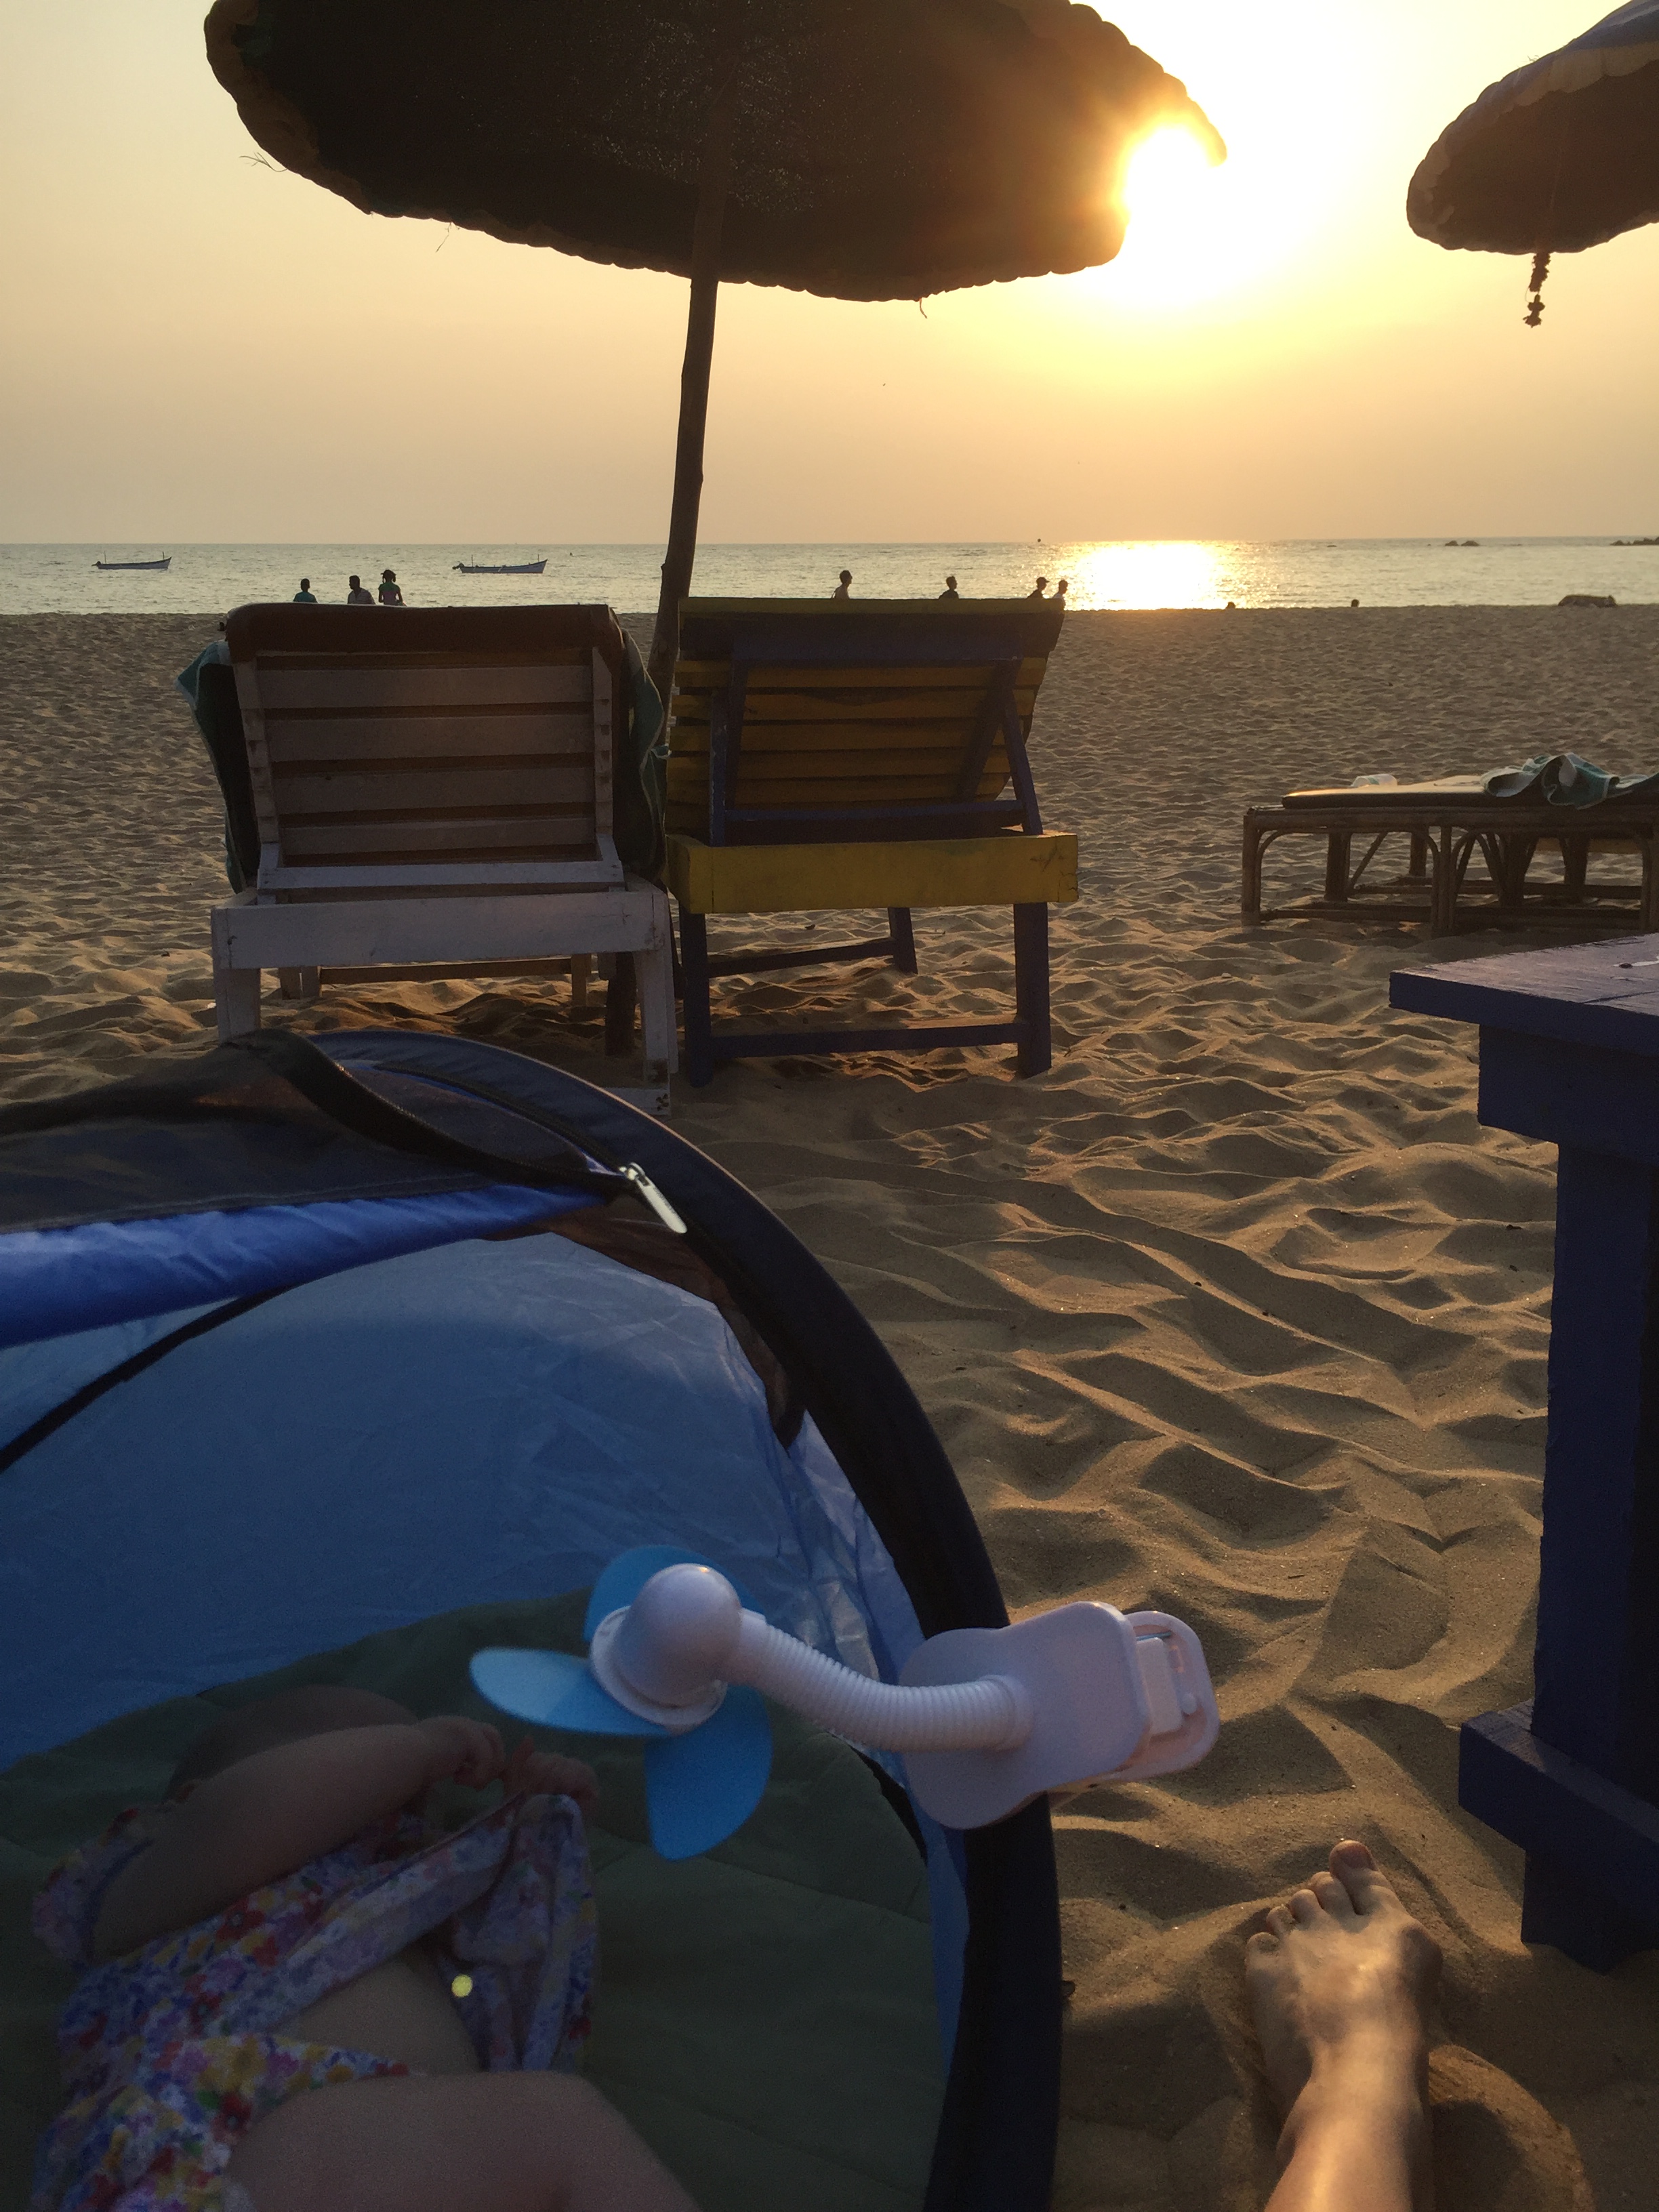 Baby on holiday in a pop-up tent travel cot on a beach in Goa, with the sun setting over the sea. A mini fan is keeping the baby cool. There are sun loungers on the beach.